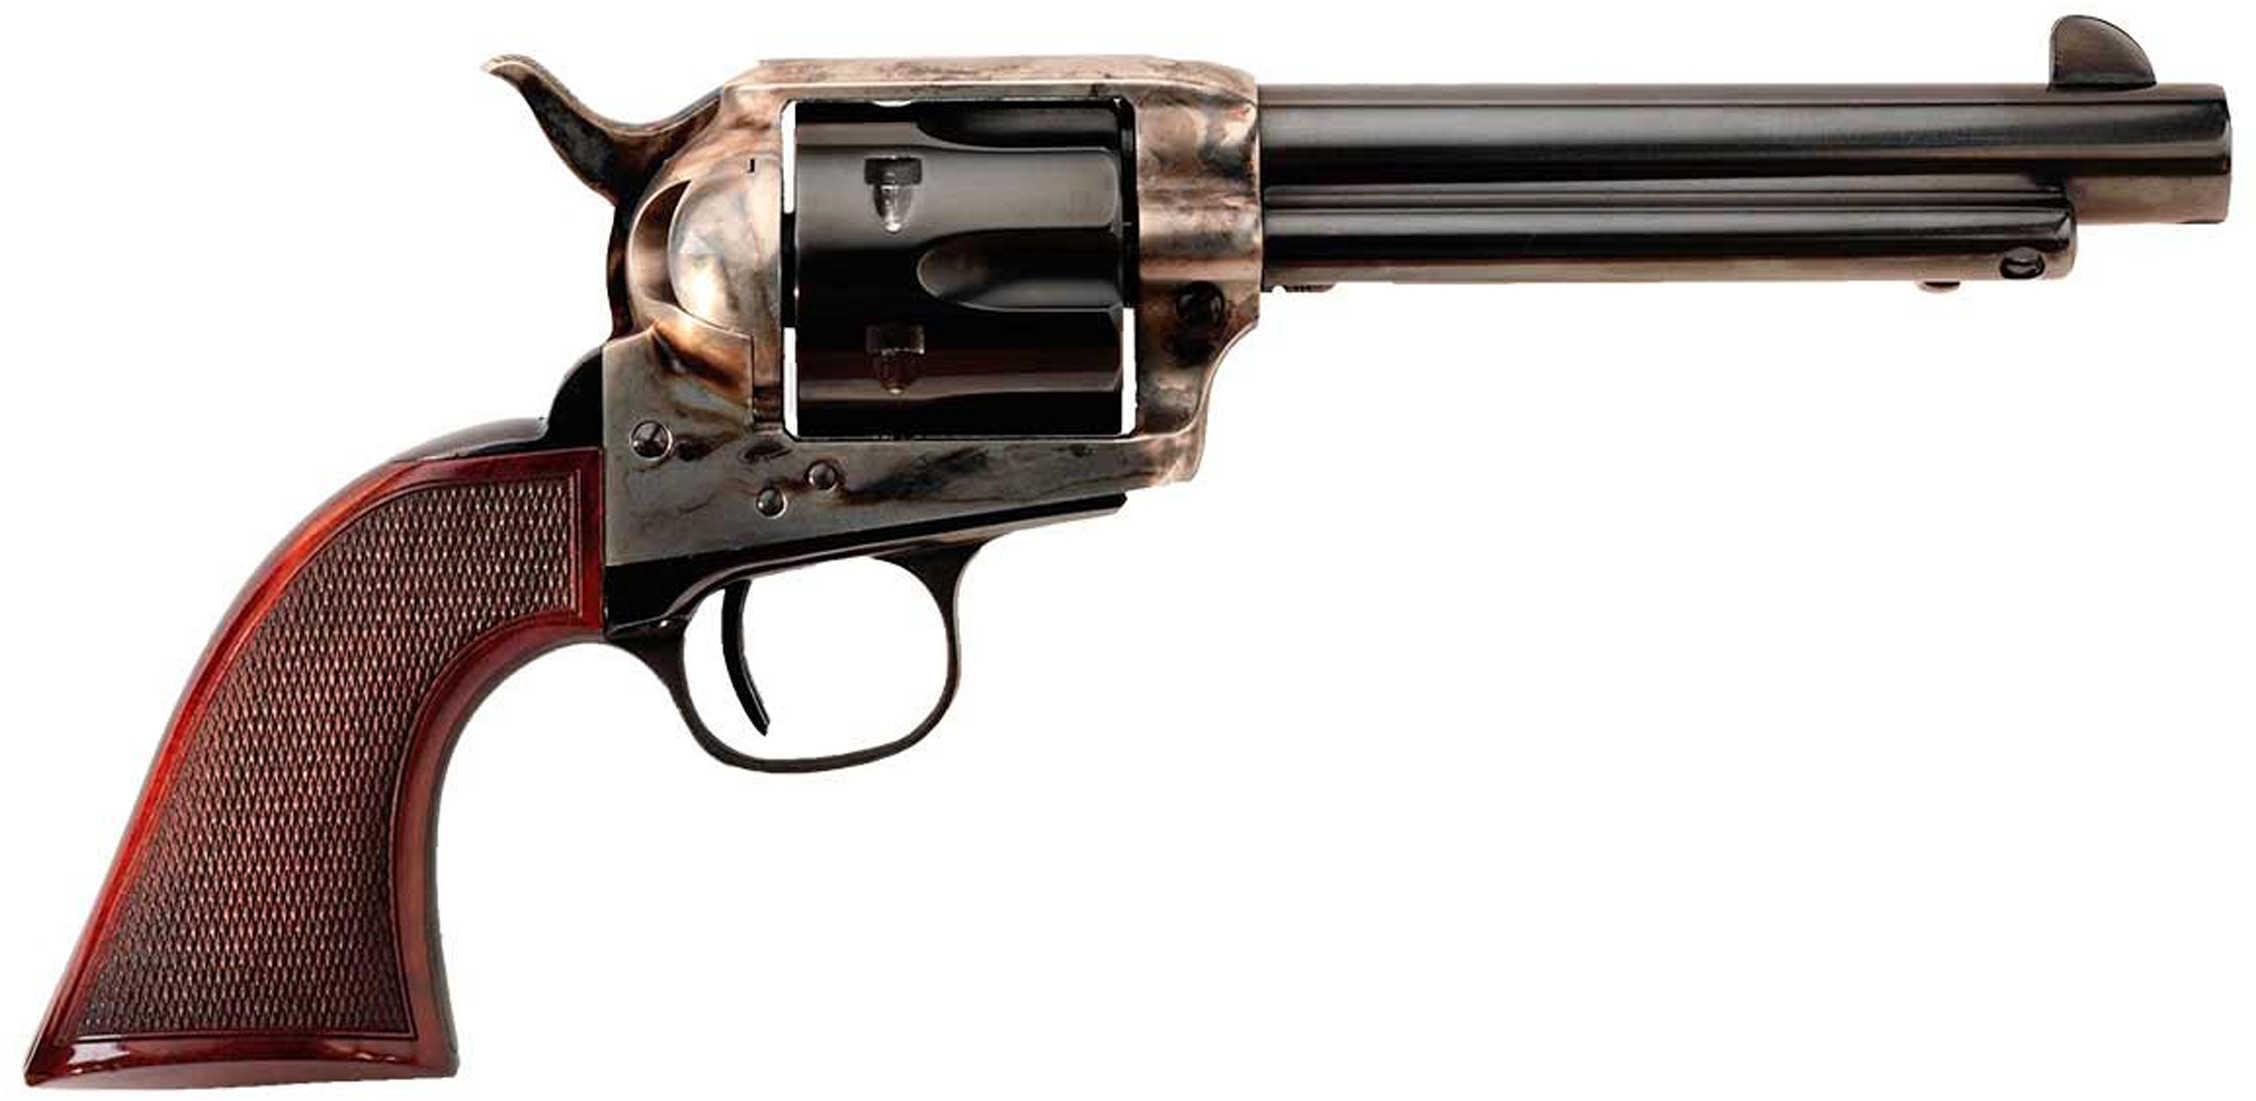 Taylor Uberti Smokewagon 1873 Revolver 357 Mag With 5.5" Barrel, Checkered Walnut Grip, And Case Hardened Frame Model 4108